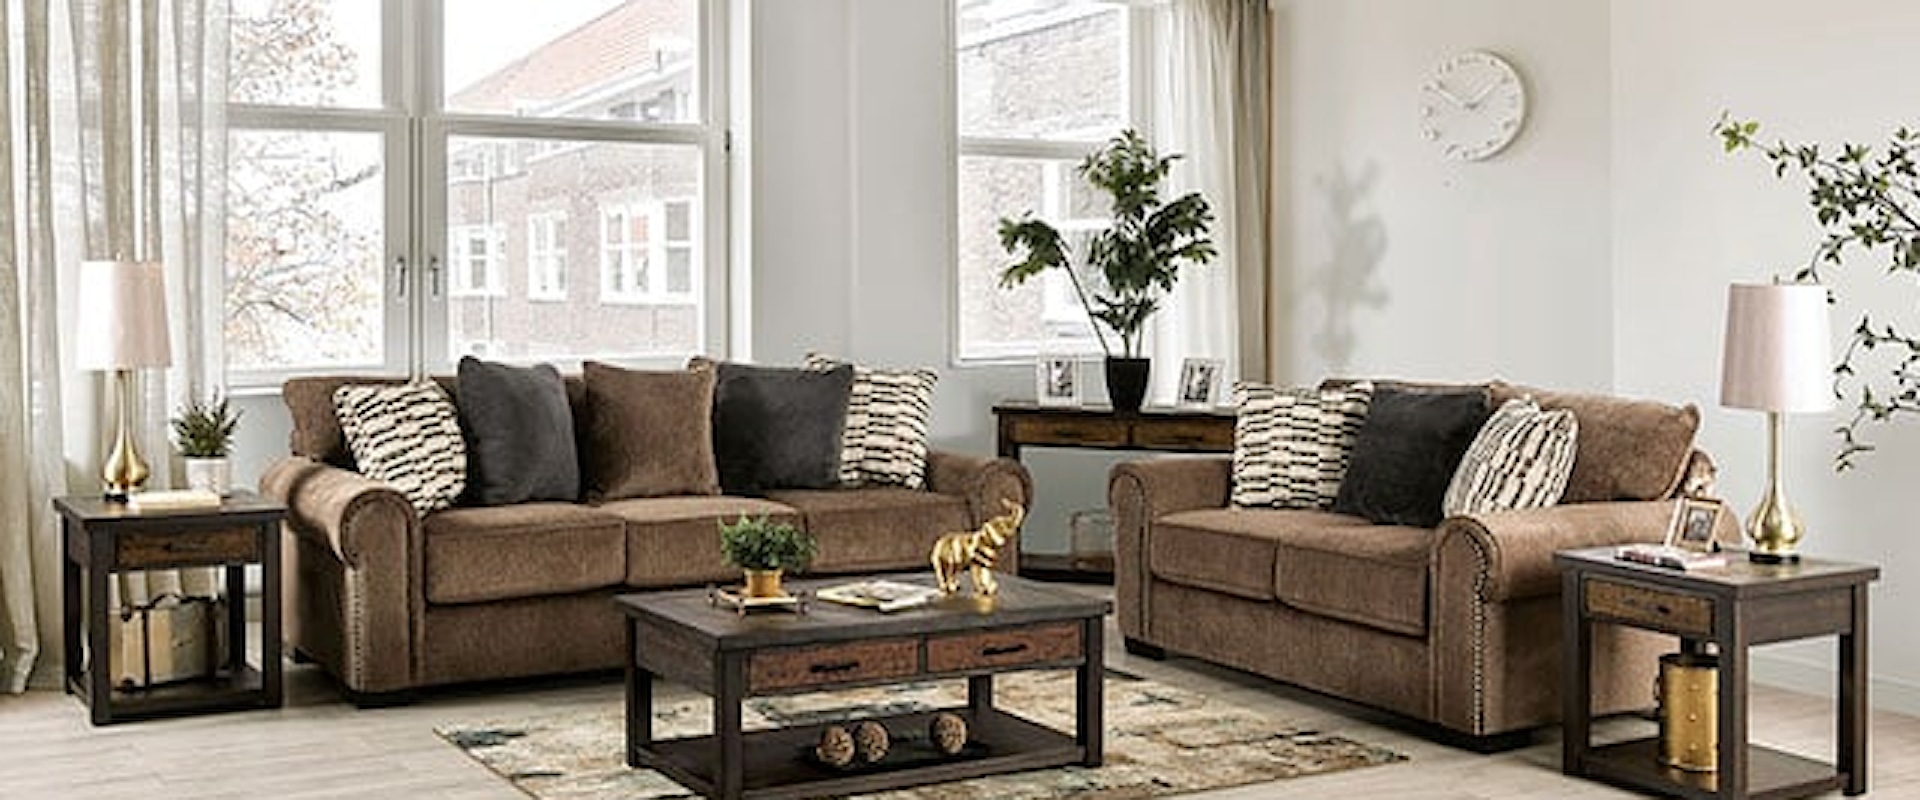 Transitional Sofa and Loveseat Living Room Set